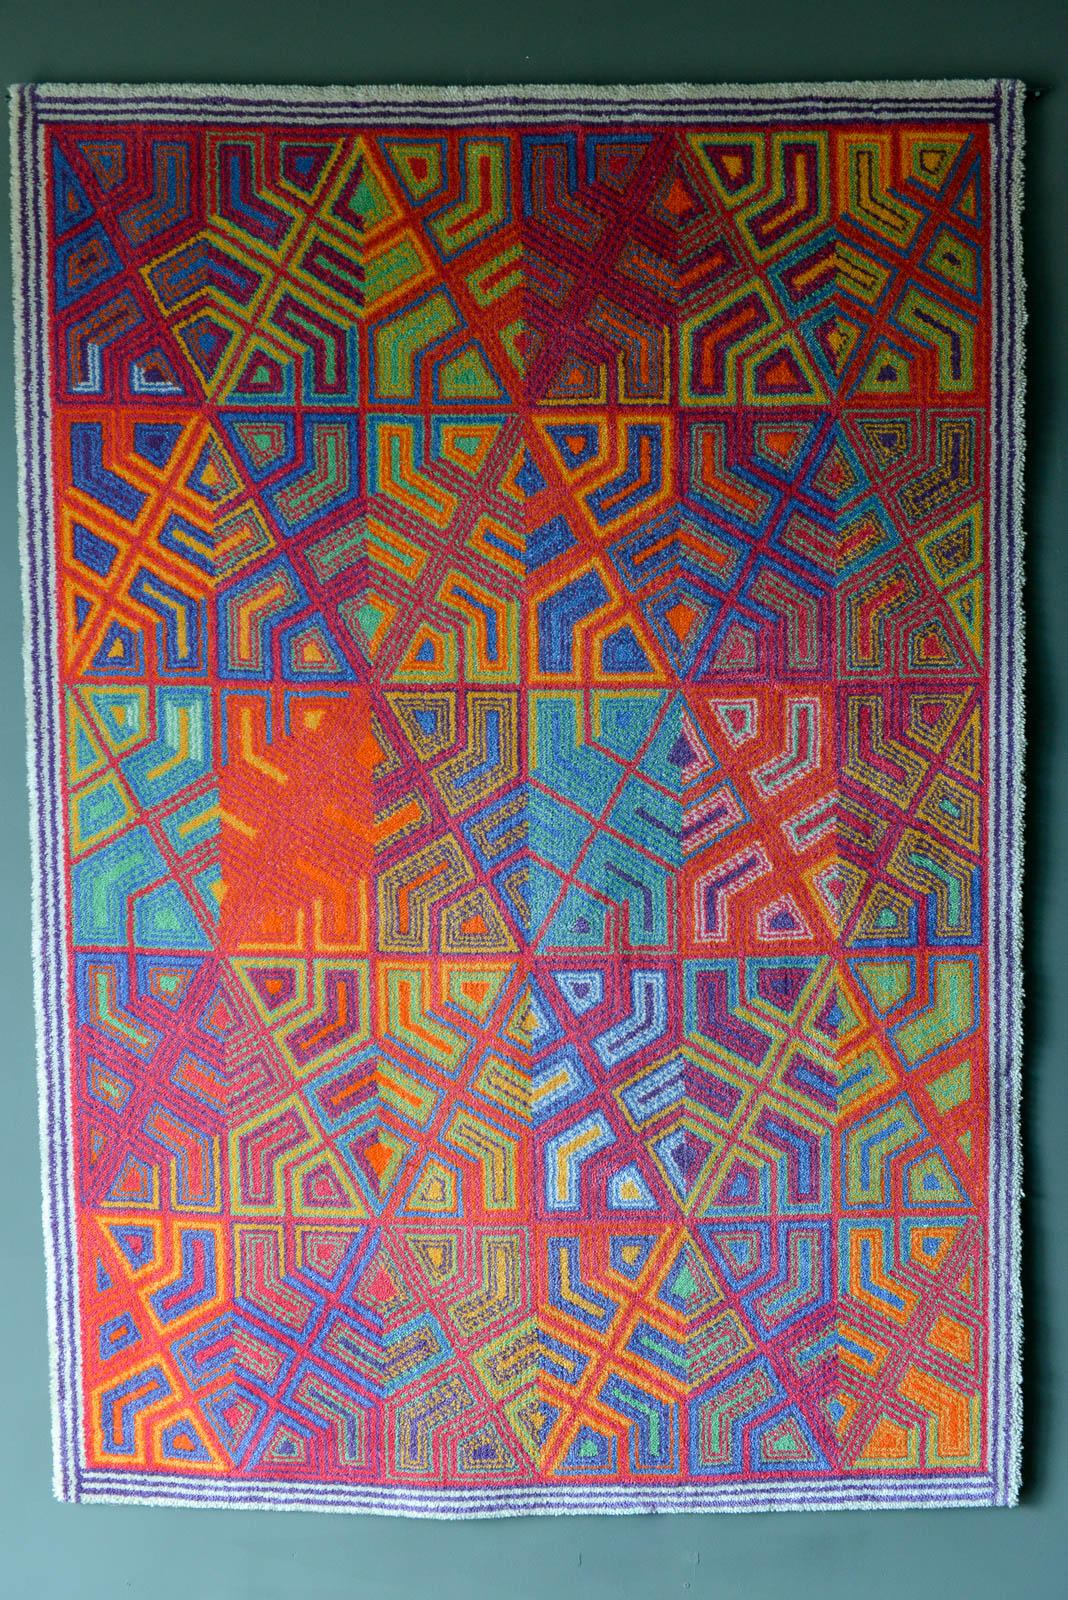 Niels Nedergaard 'Infinity' for Ege Axminster rug or Wall Tapestry, 1984. Beautiful original condition, acquired from original owner and was used as a wall hanging, never on floor. Professionally cleaned and measures 5x7.